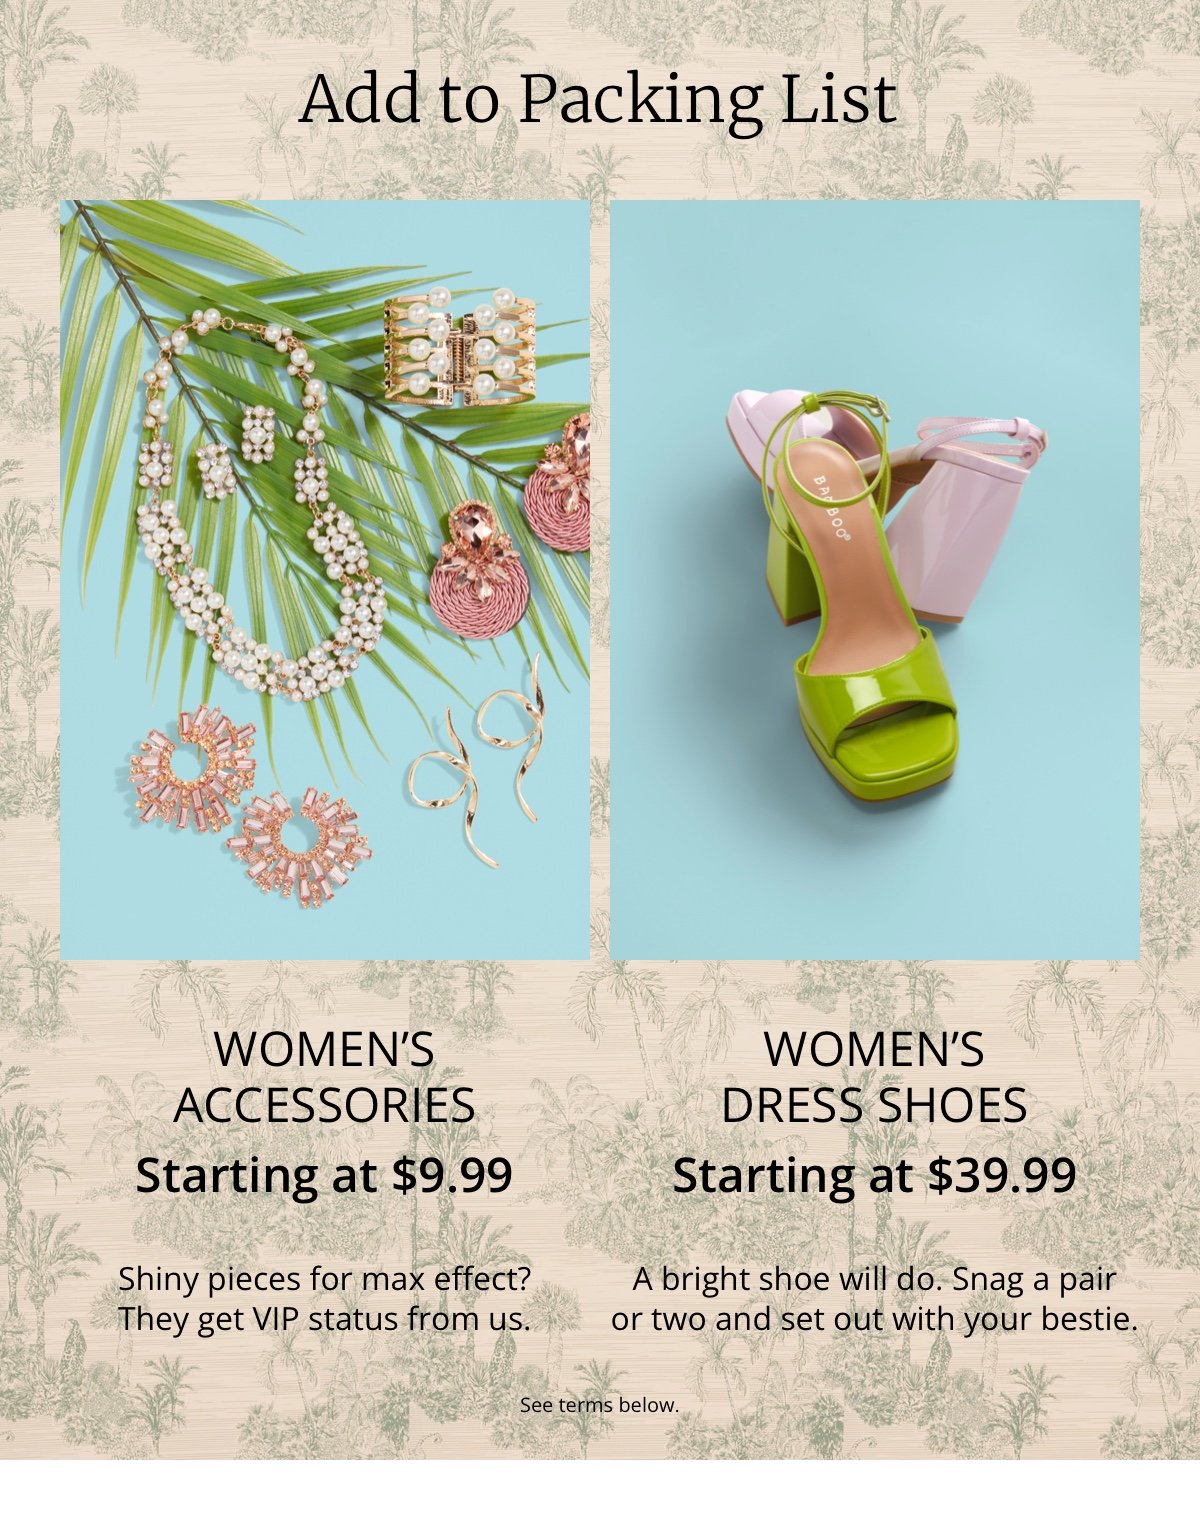 Add to Packing List|WOMEN'S|ACCESSORIES|Starting at \\$9.99|Shiny pieces for max effect? |They get VIP status from us.|Women's |Dress Shoes|Starting at \\$39.99|A bright shoe will do. Snag a pair| or two and set out with your bestie.|See terms below.